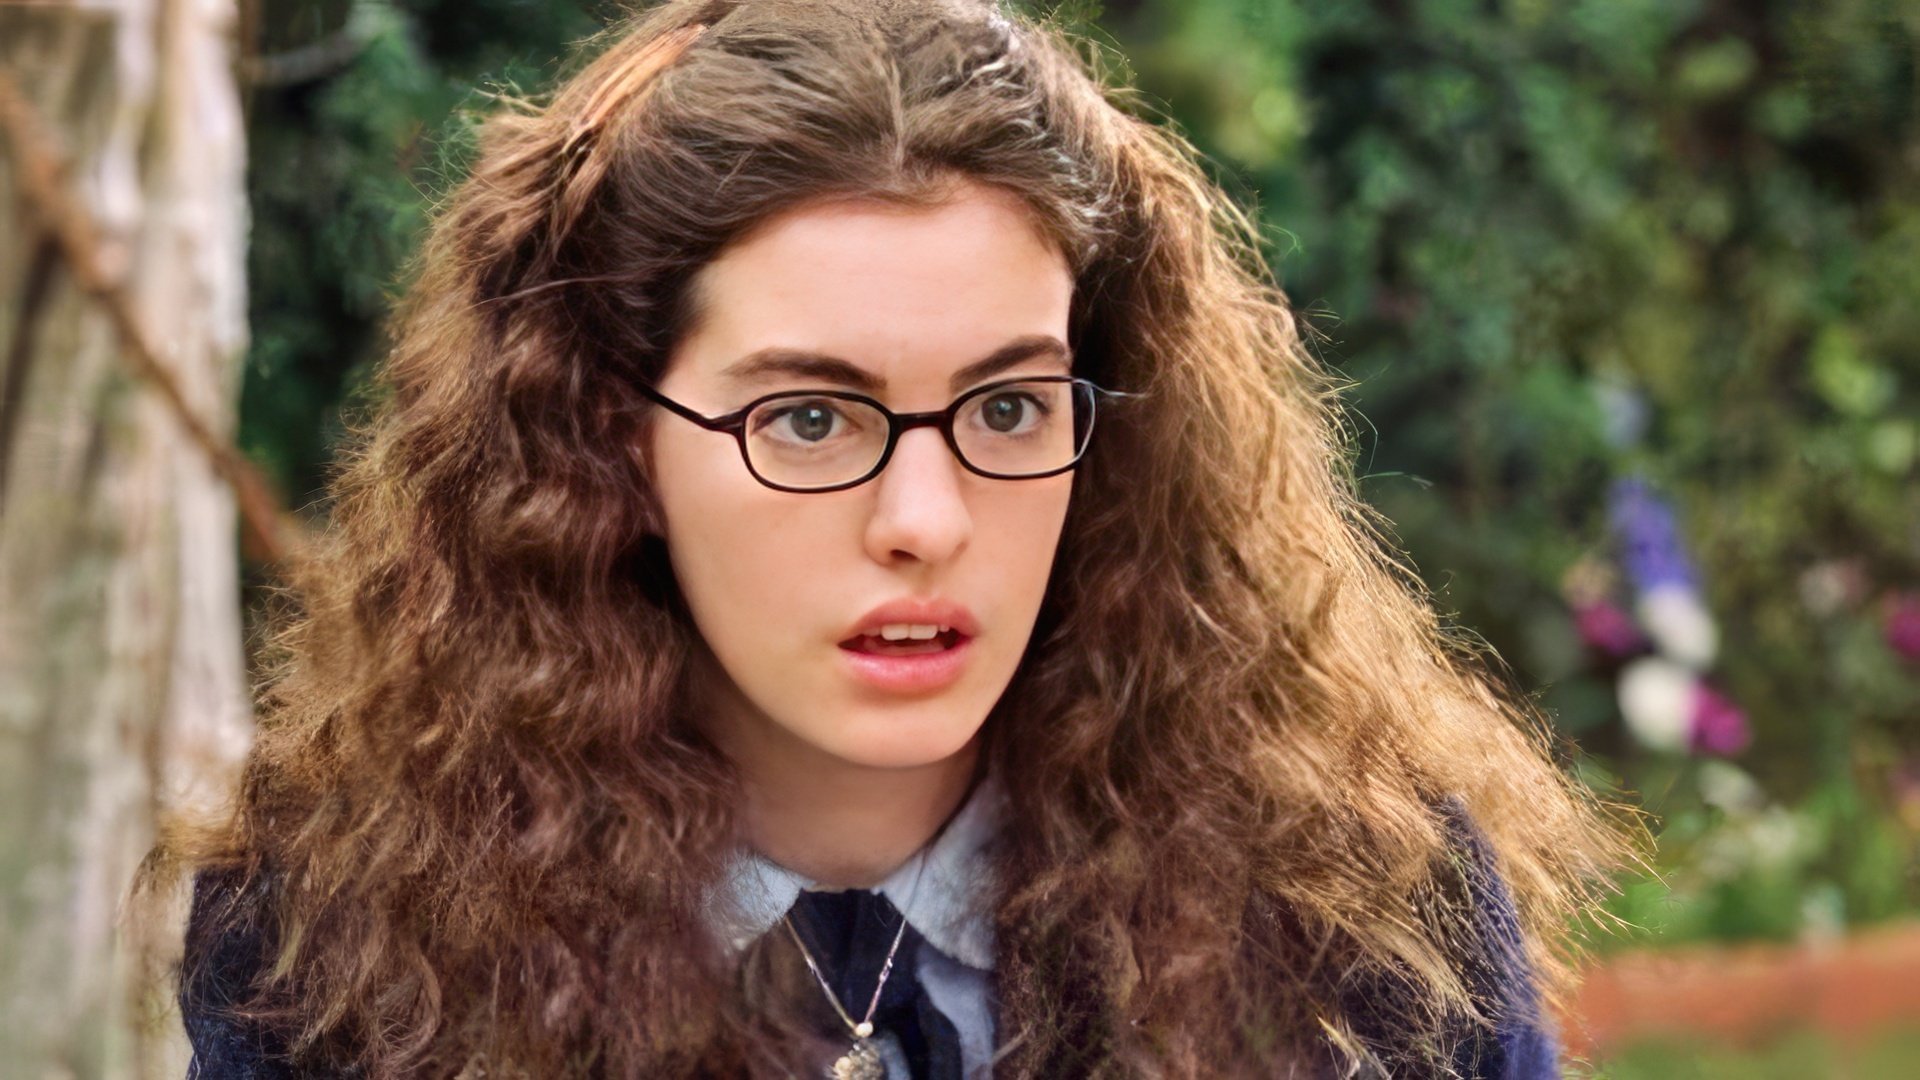 A Still from 'The Princess Diaries'